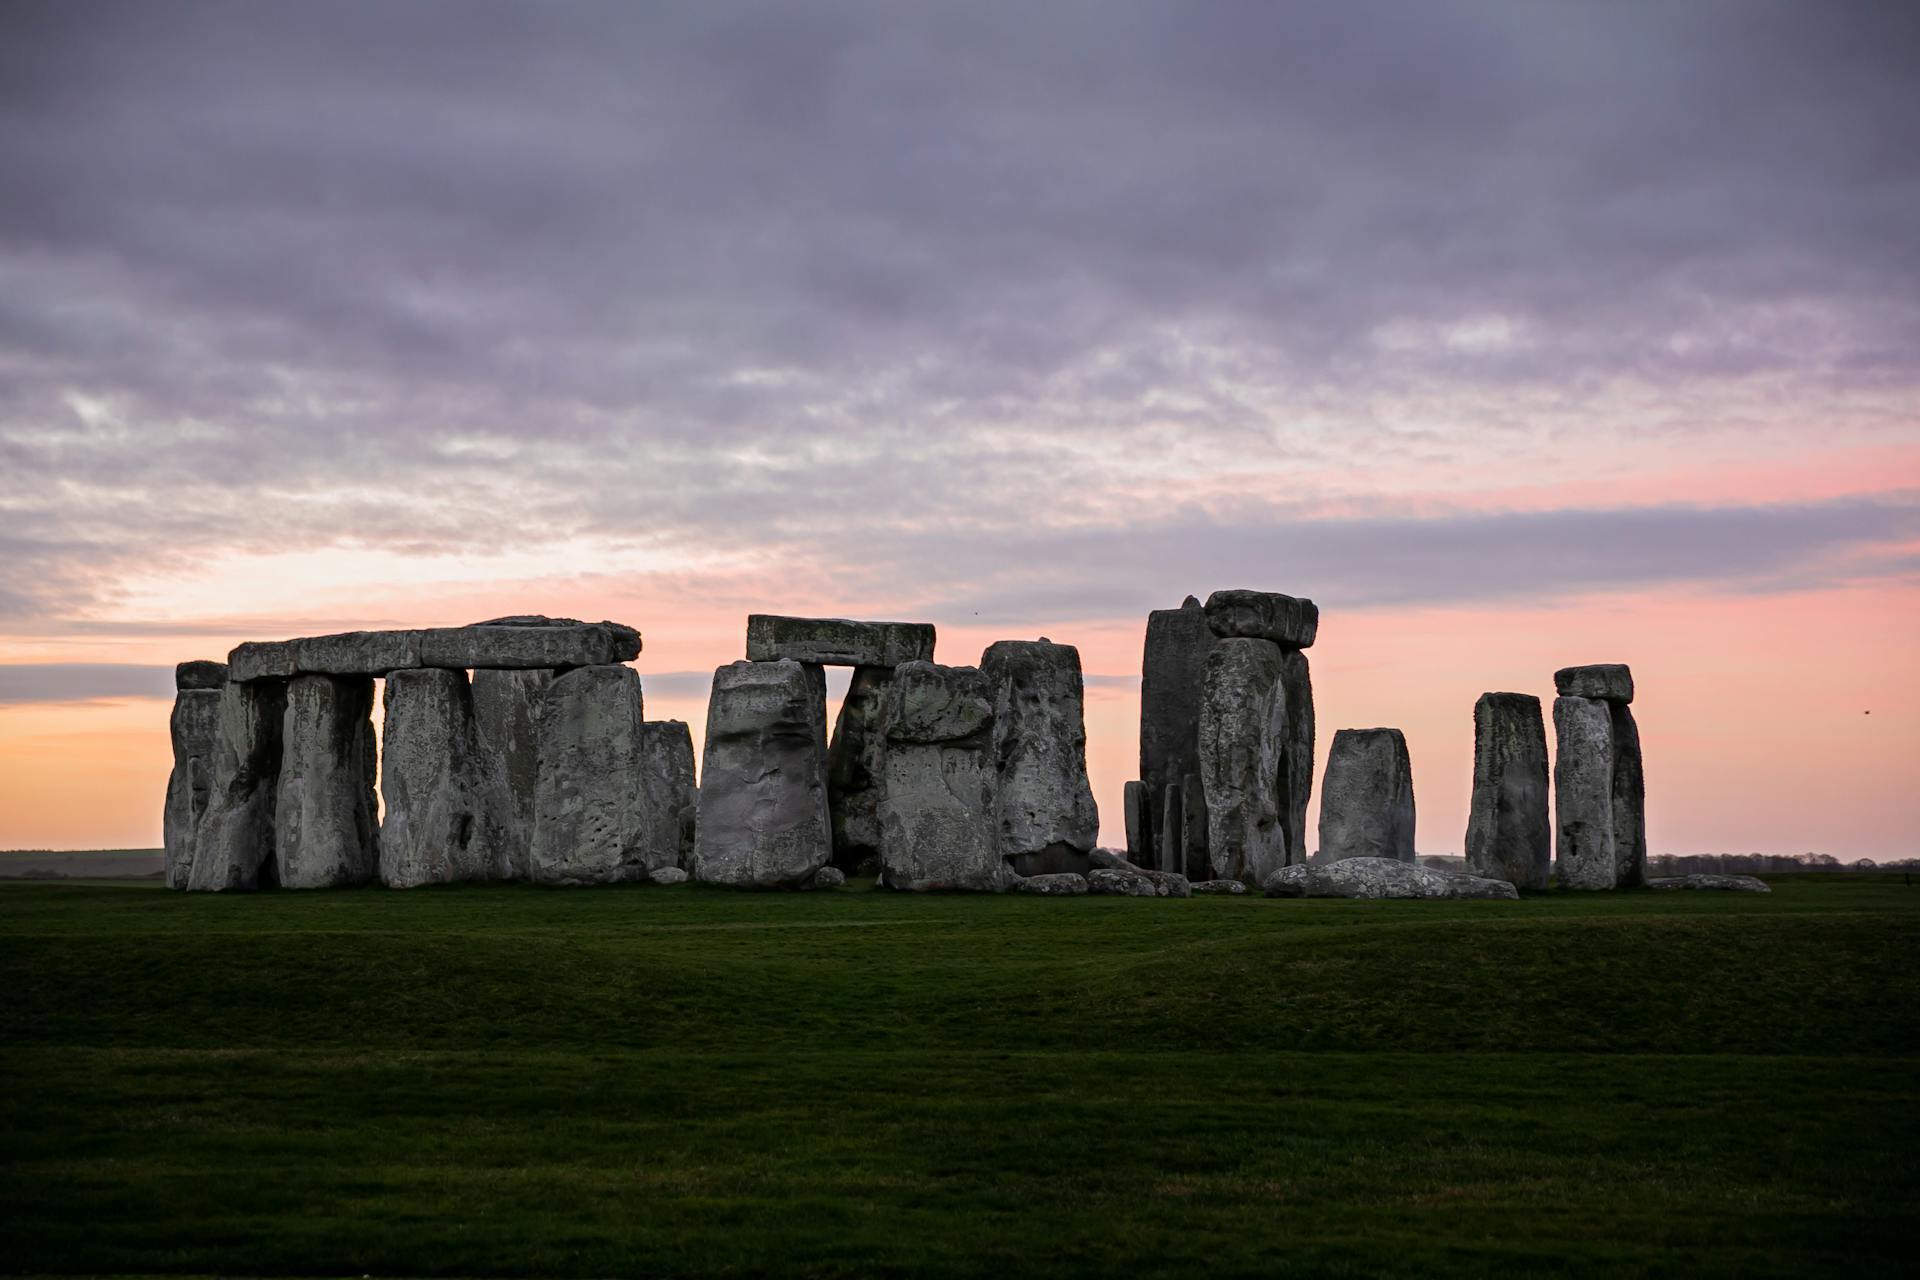 Scientists make discovery about the origin of Stonehenge's large stones